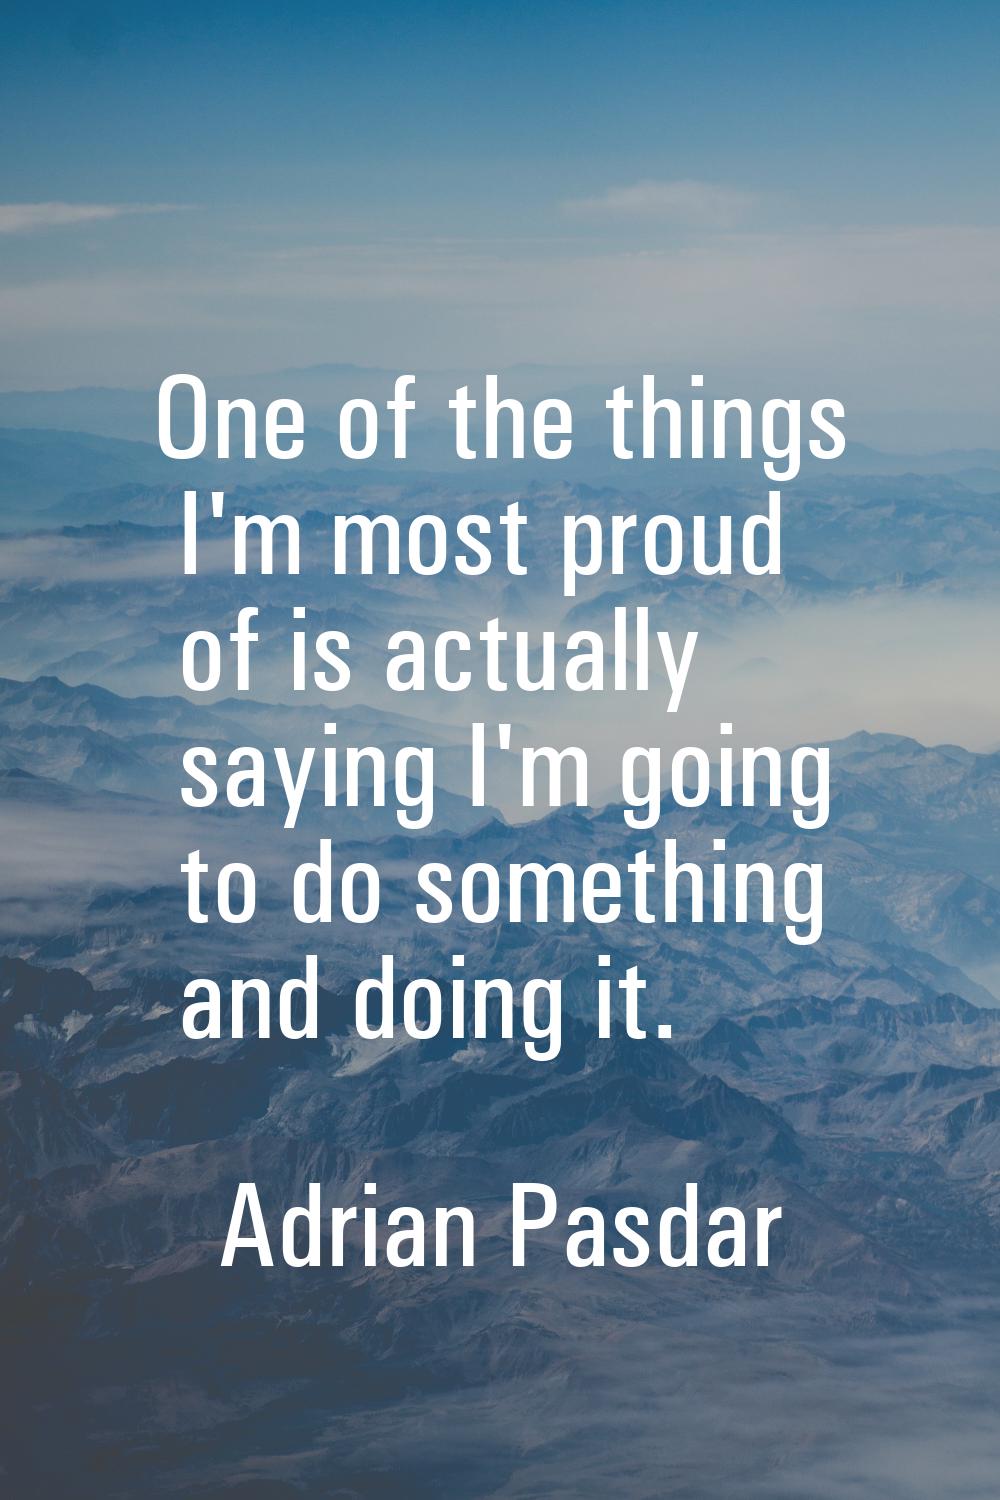 One of the things I'm most proud of is actually saying I'm going to do something and doing it.